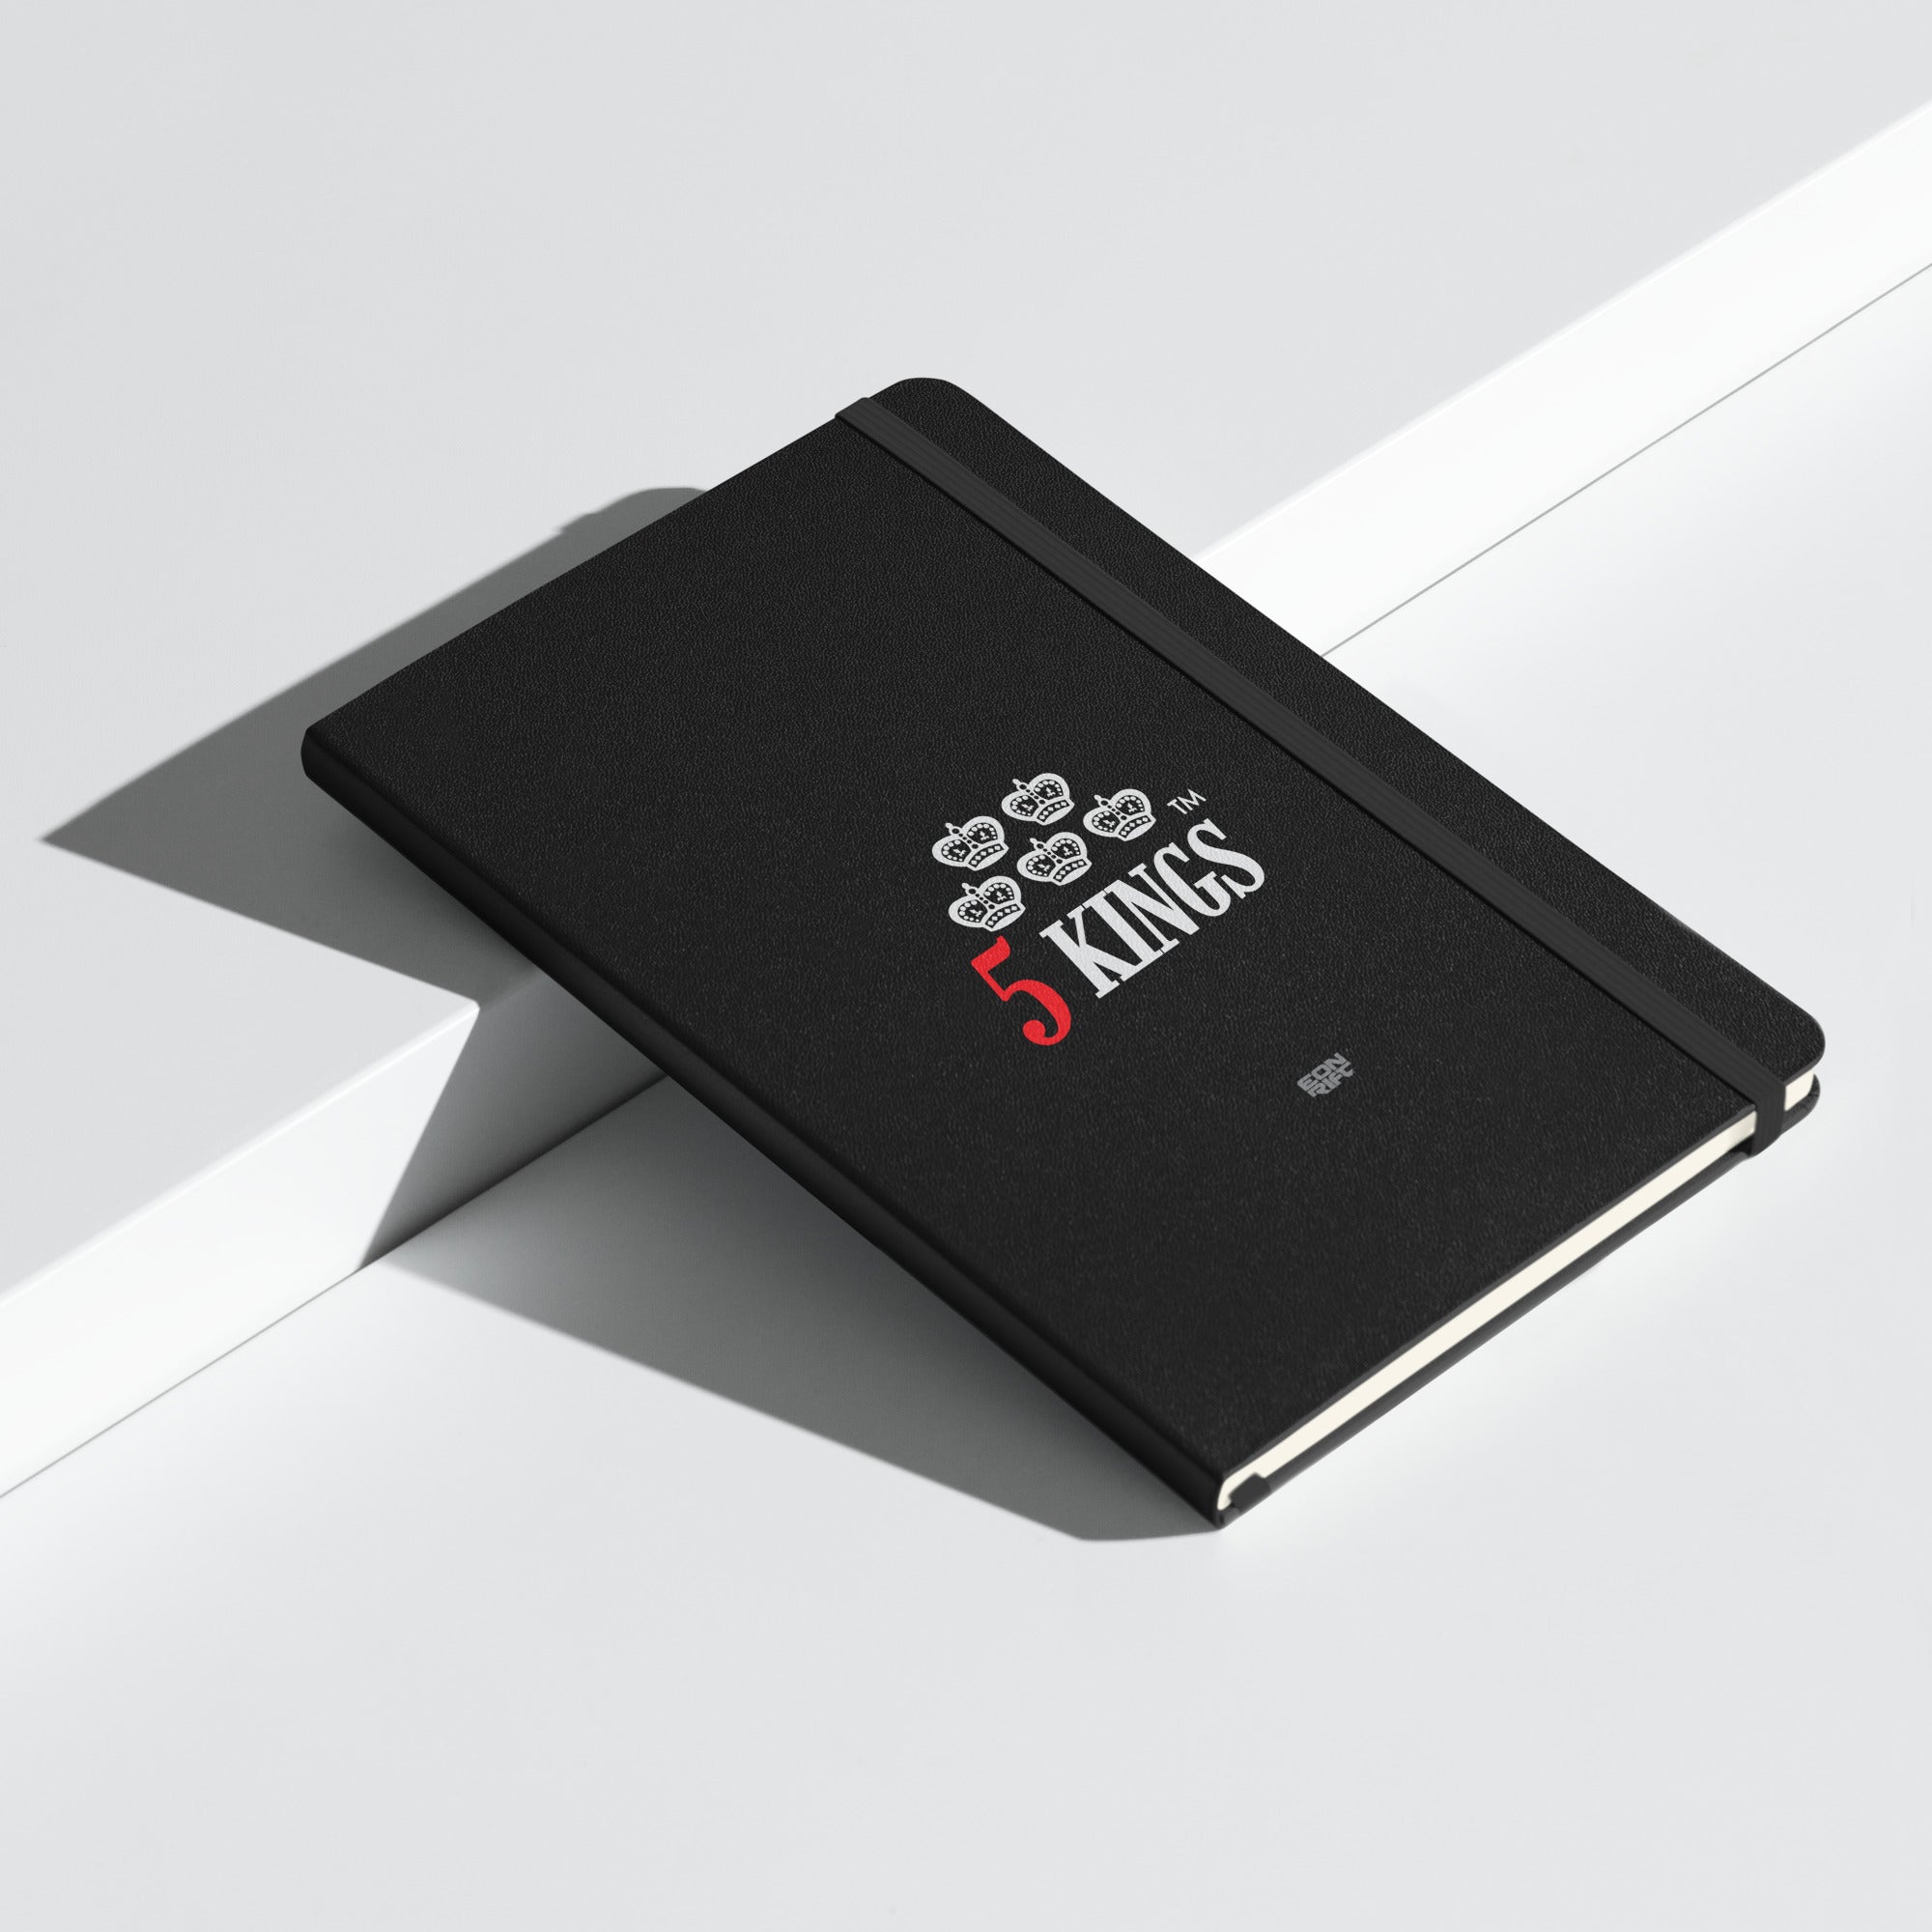 5KINGS | Hardcover bound notebook